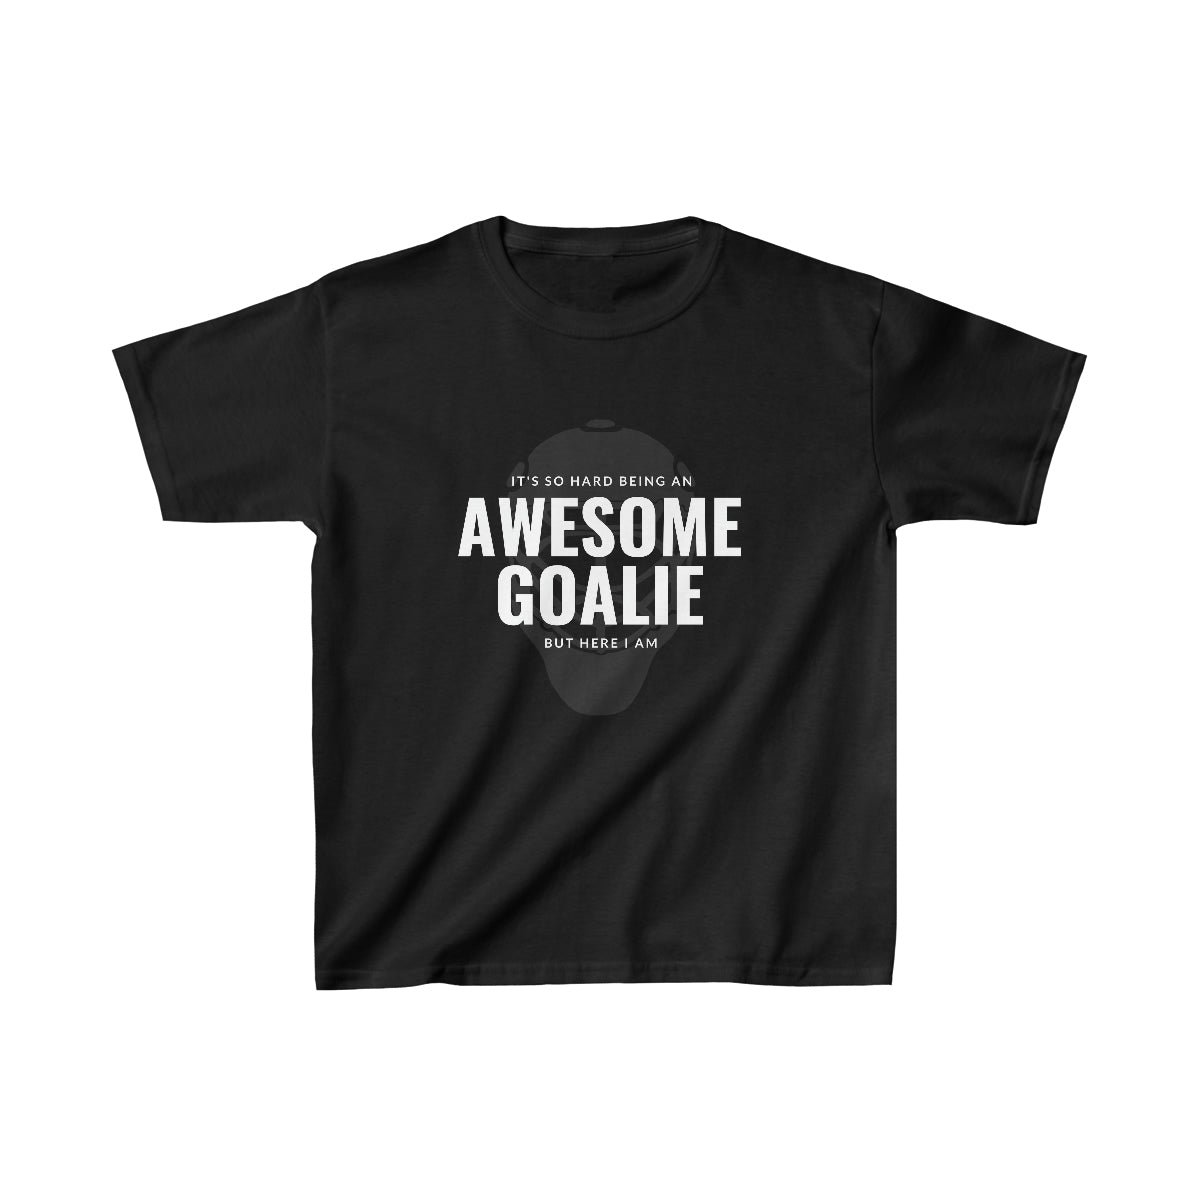 It's hard being an AWESOME GOALIE, but here I am - Youth Tee